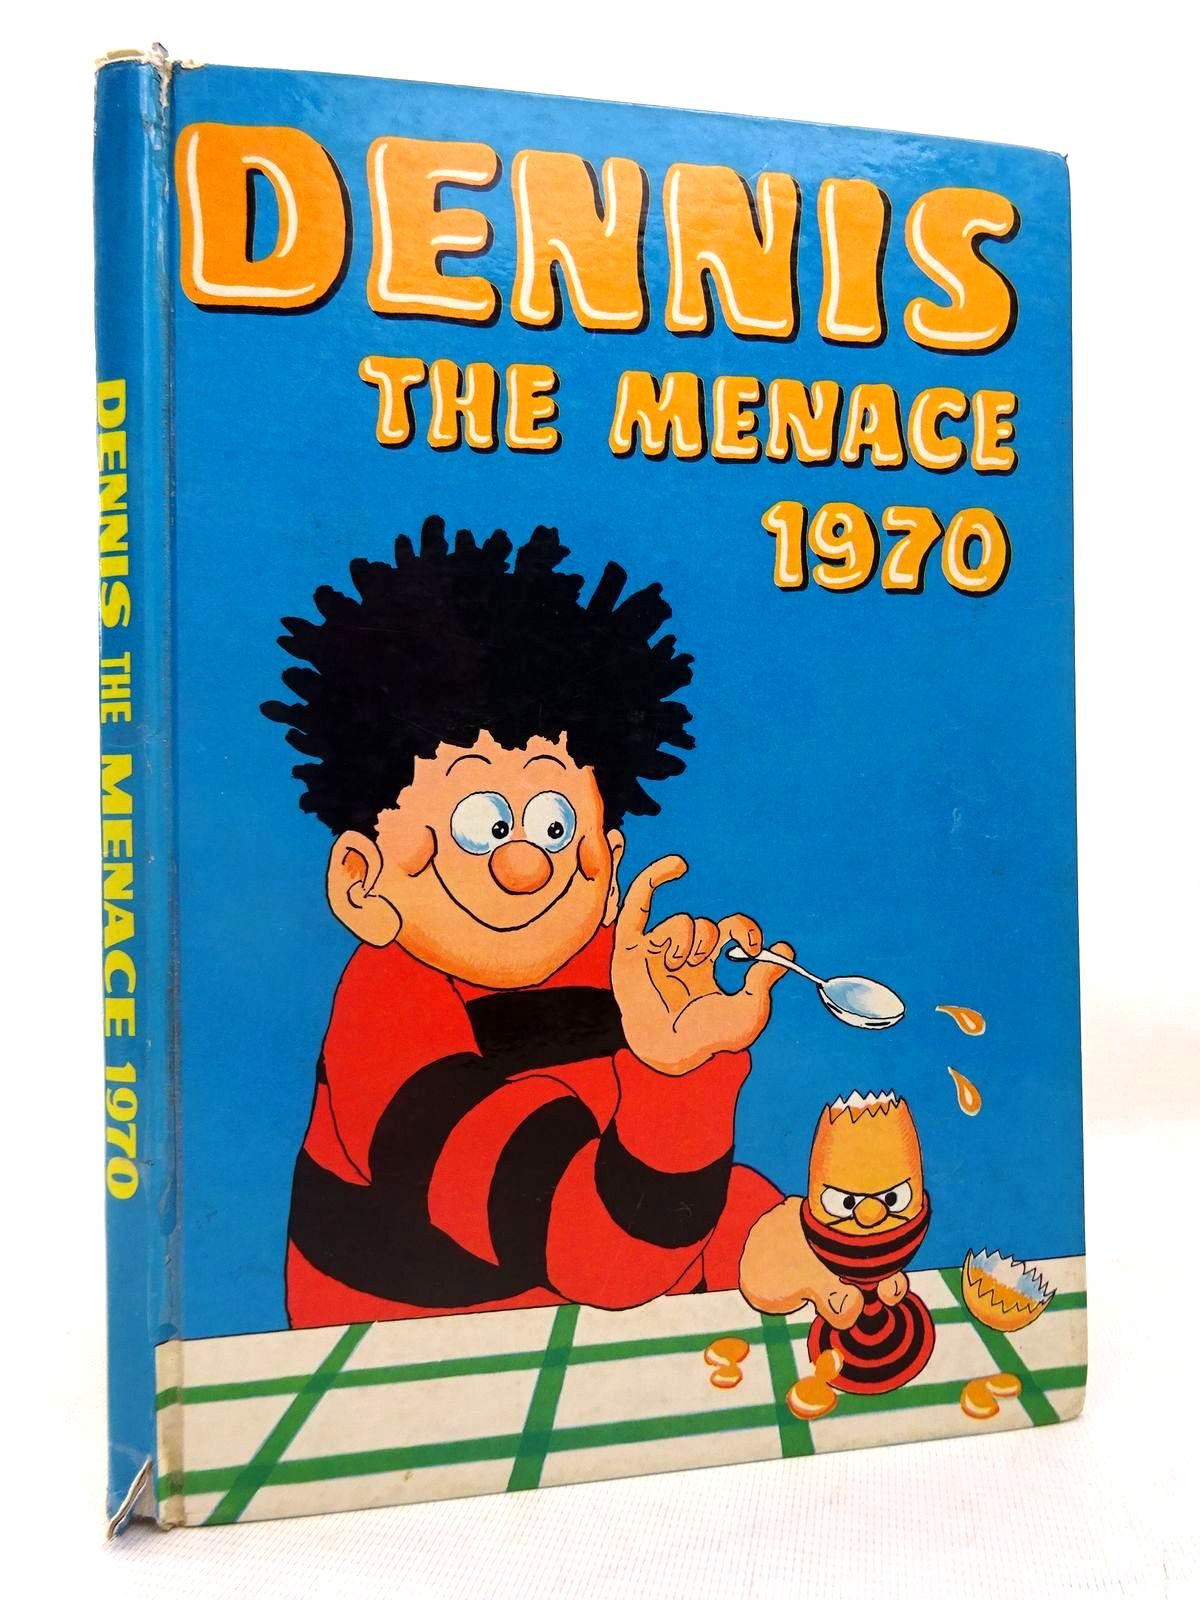 Photo of DENNIS THE MENACE 1970 published by D.C. Thomson &amp; Co Ltd. (STOCK CODE: 1816395)  for sale by Stella & Rose's Books